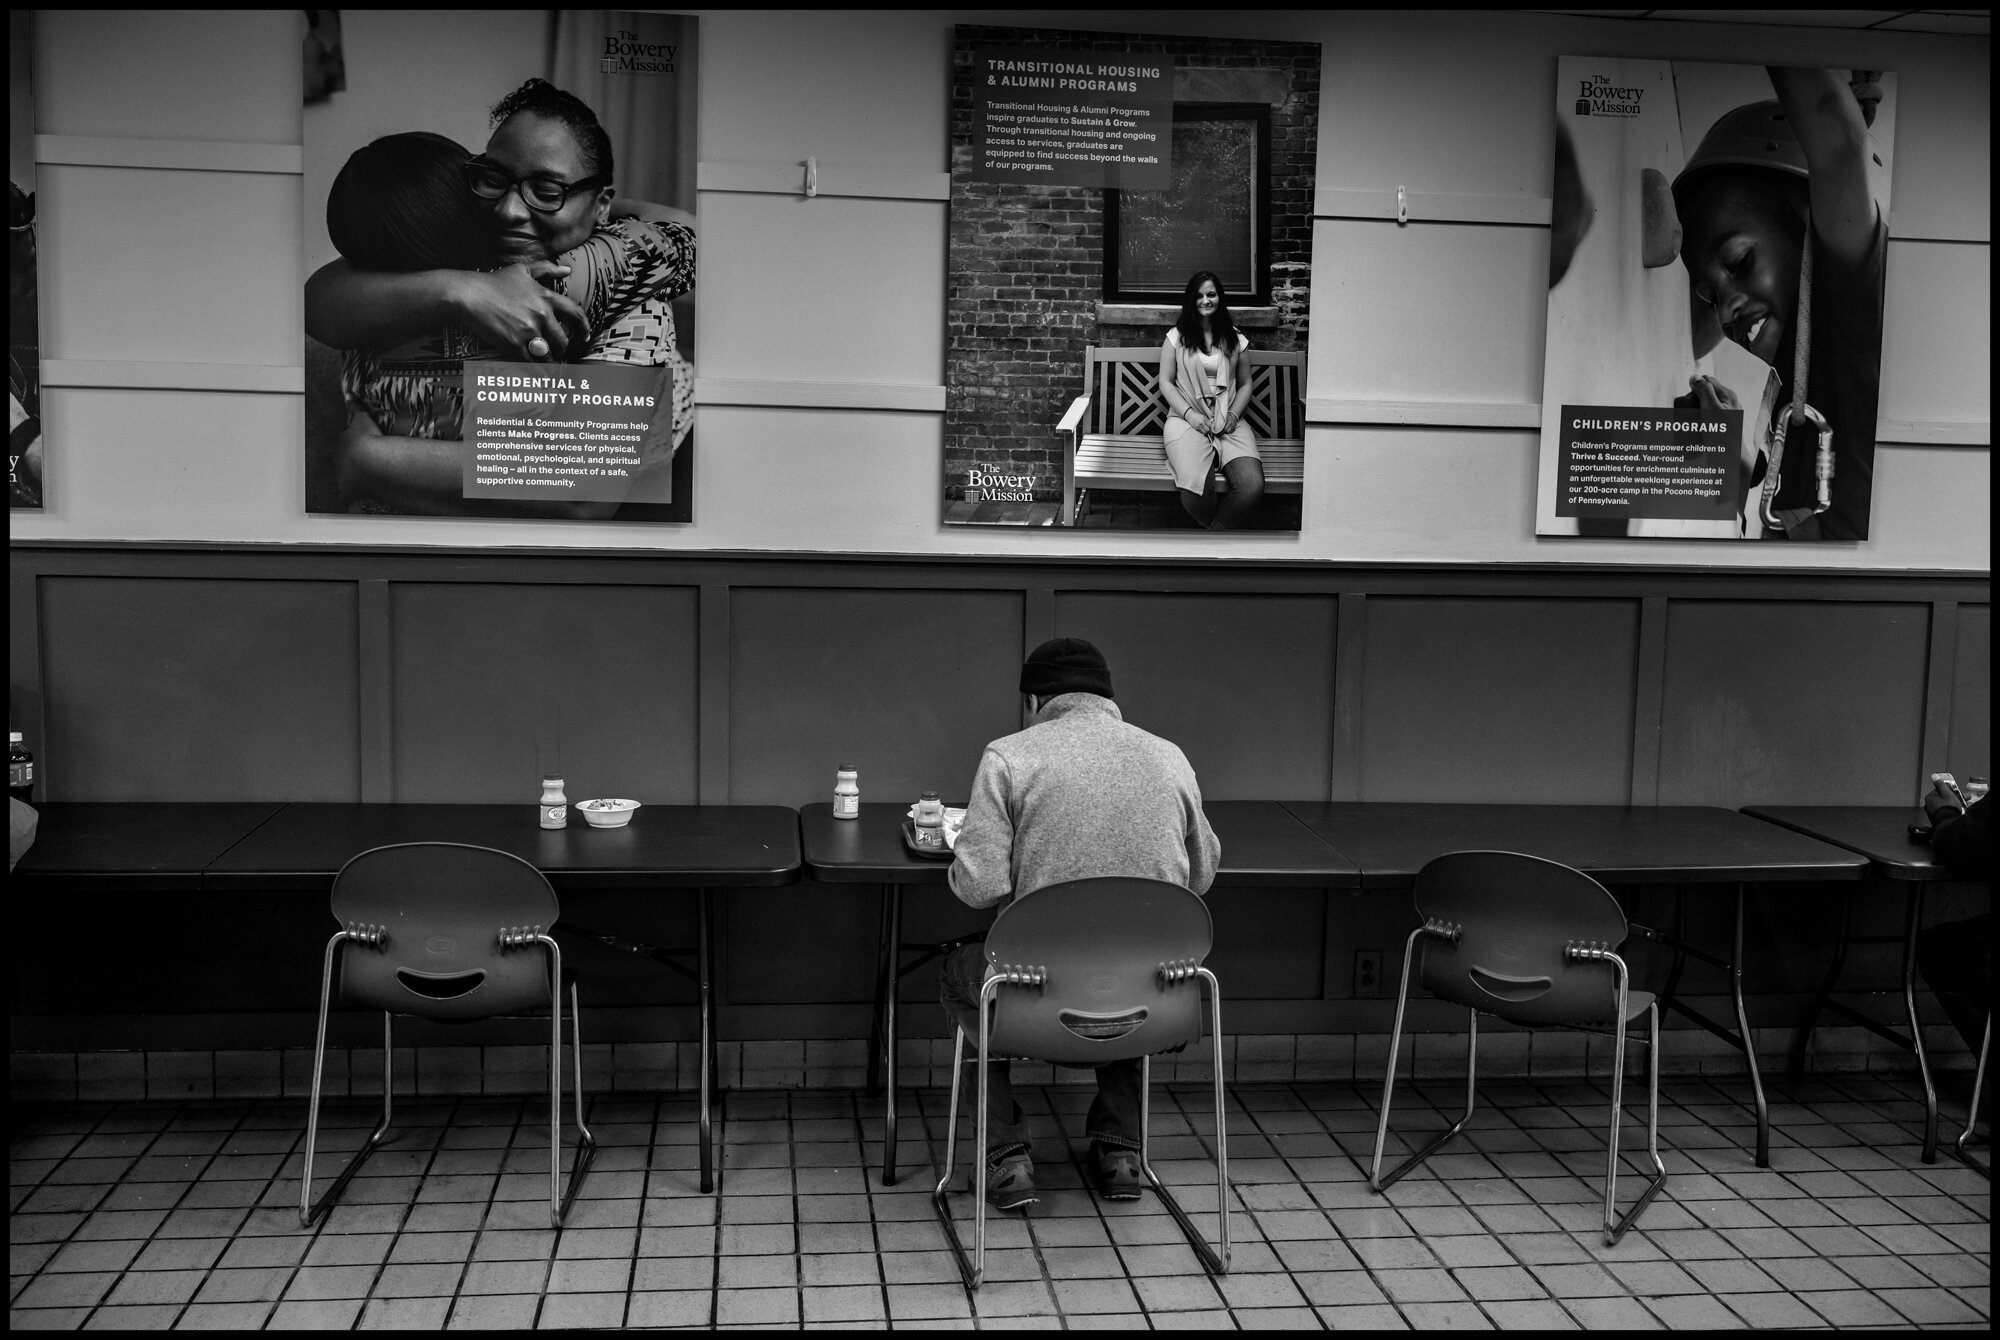  A man, without shelter, temporarily living at The Bowery, eats a hot noon meal.  April 10, 2020. © Peter Turnley  ID# 18-012 